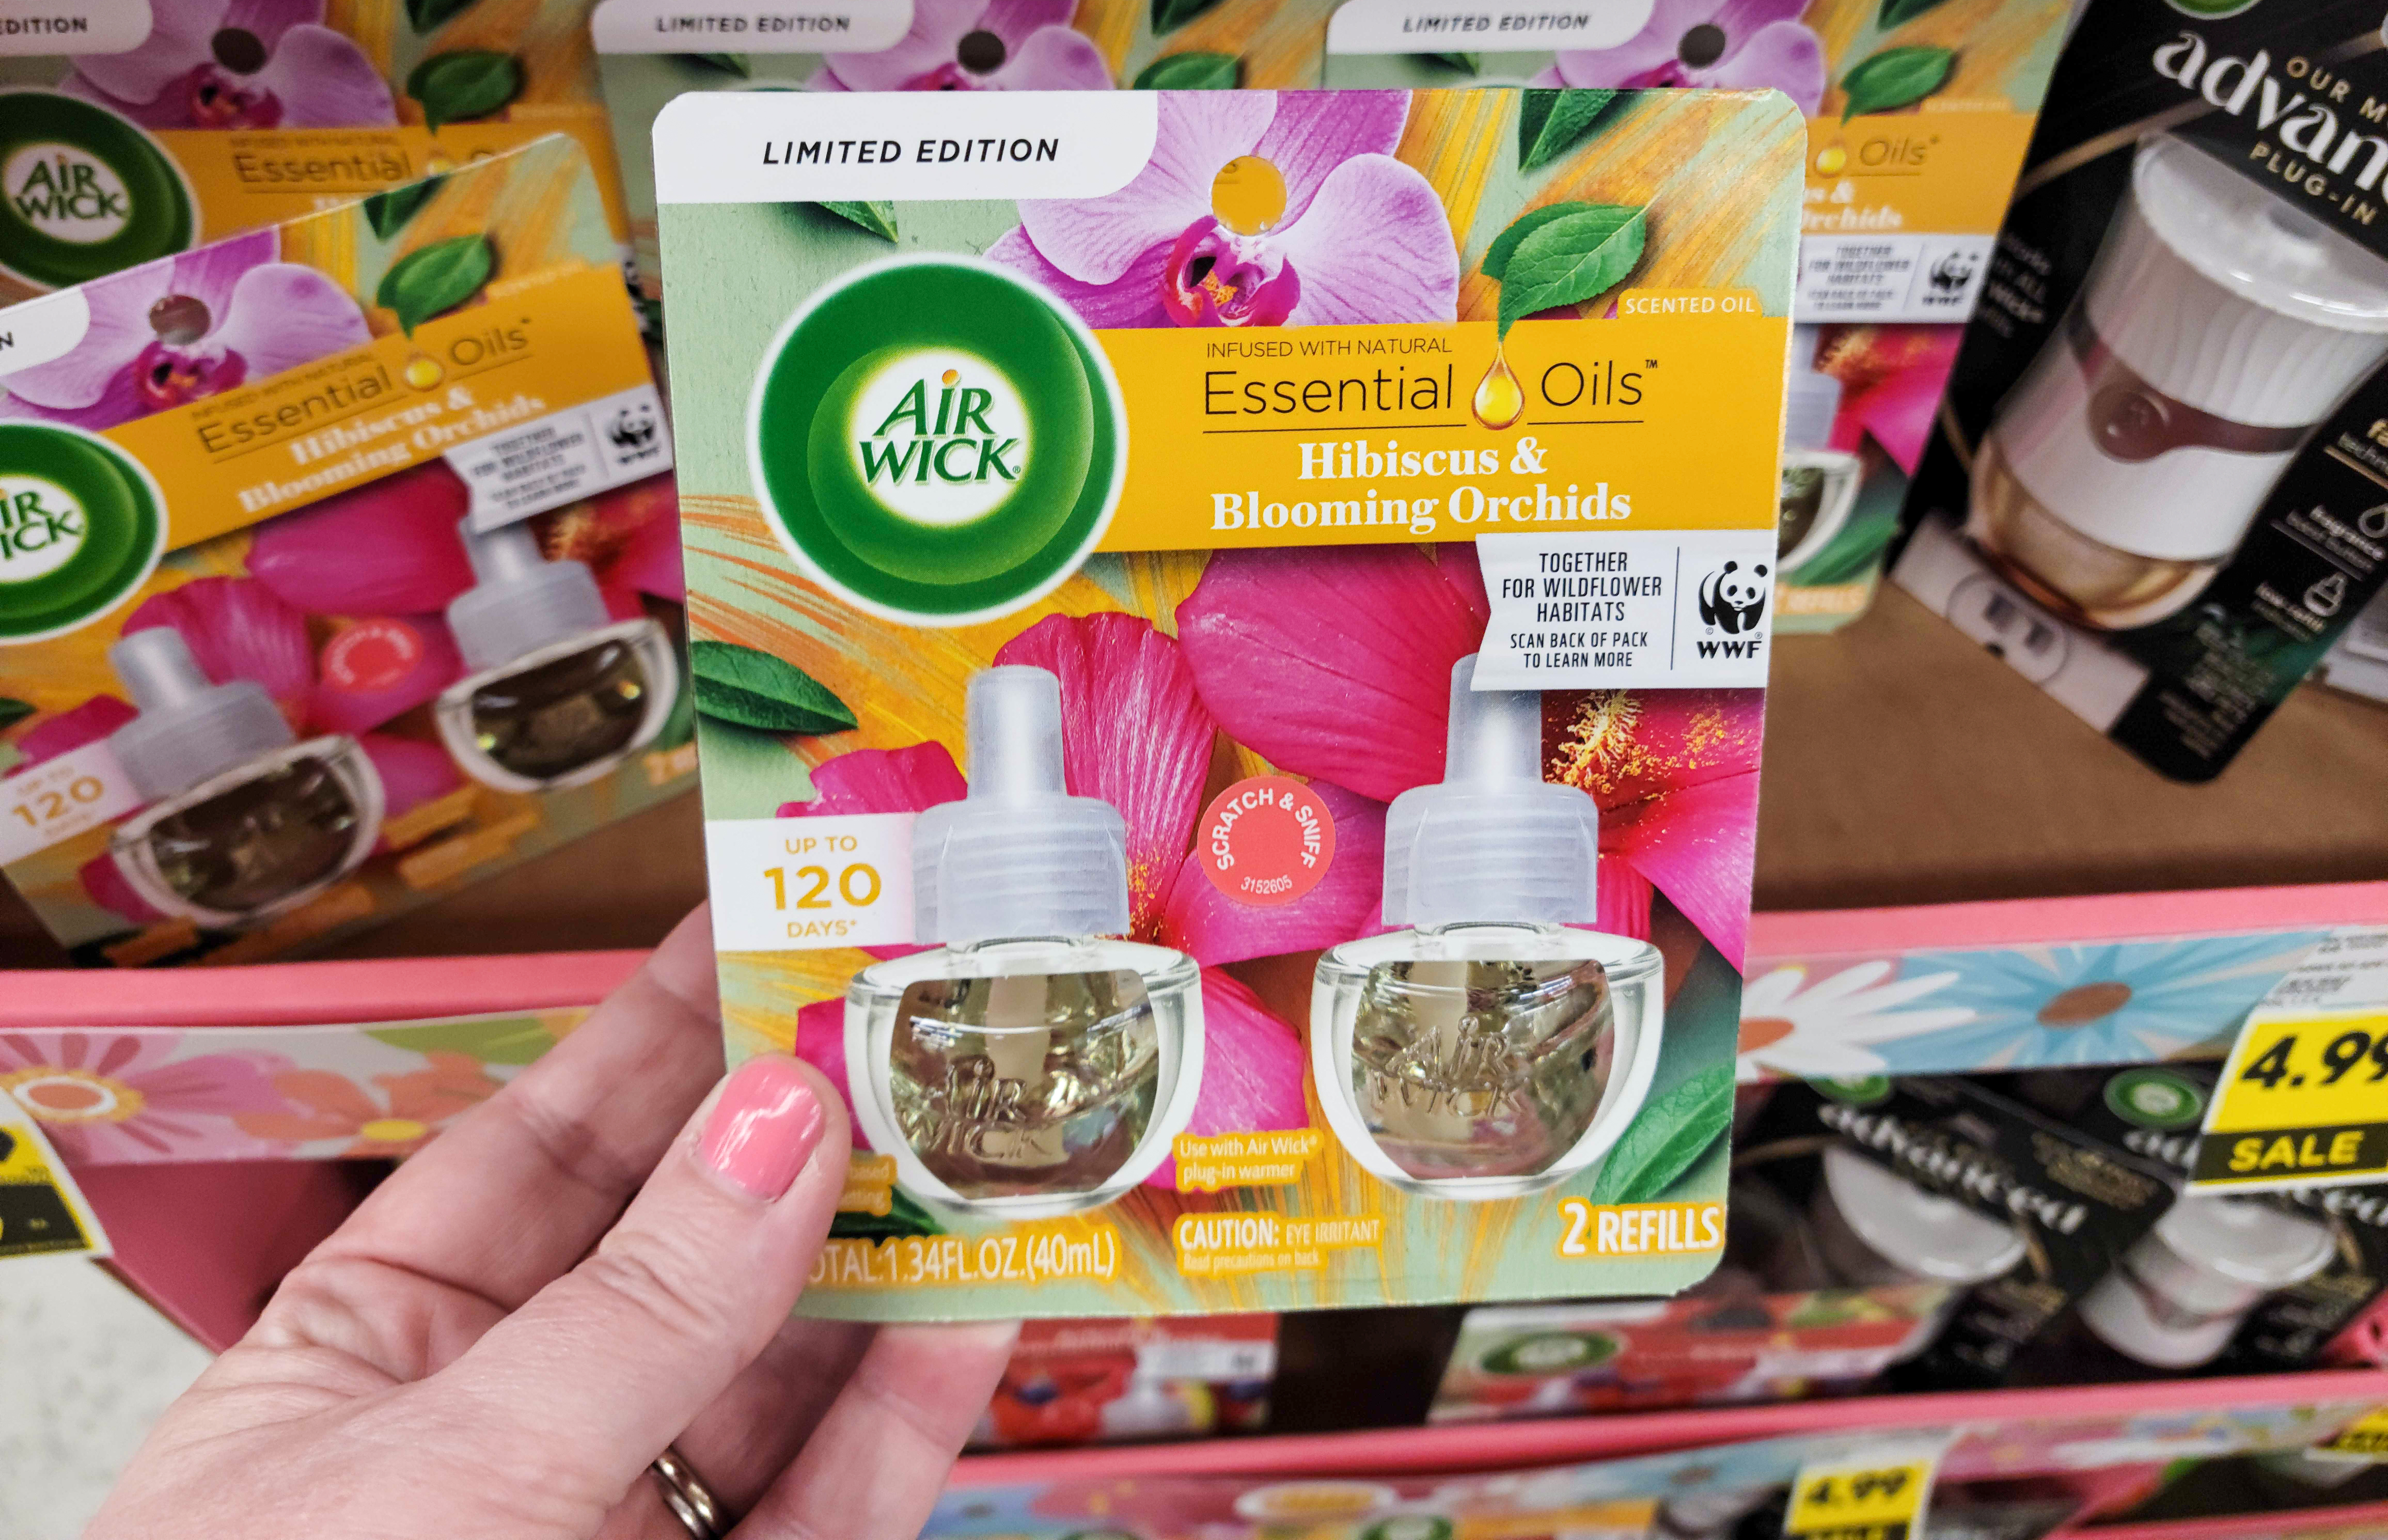 B1G1 Free Air Wick Scented Oil Refills at Kroger card image